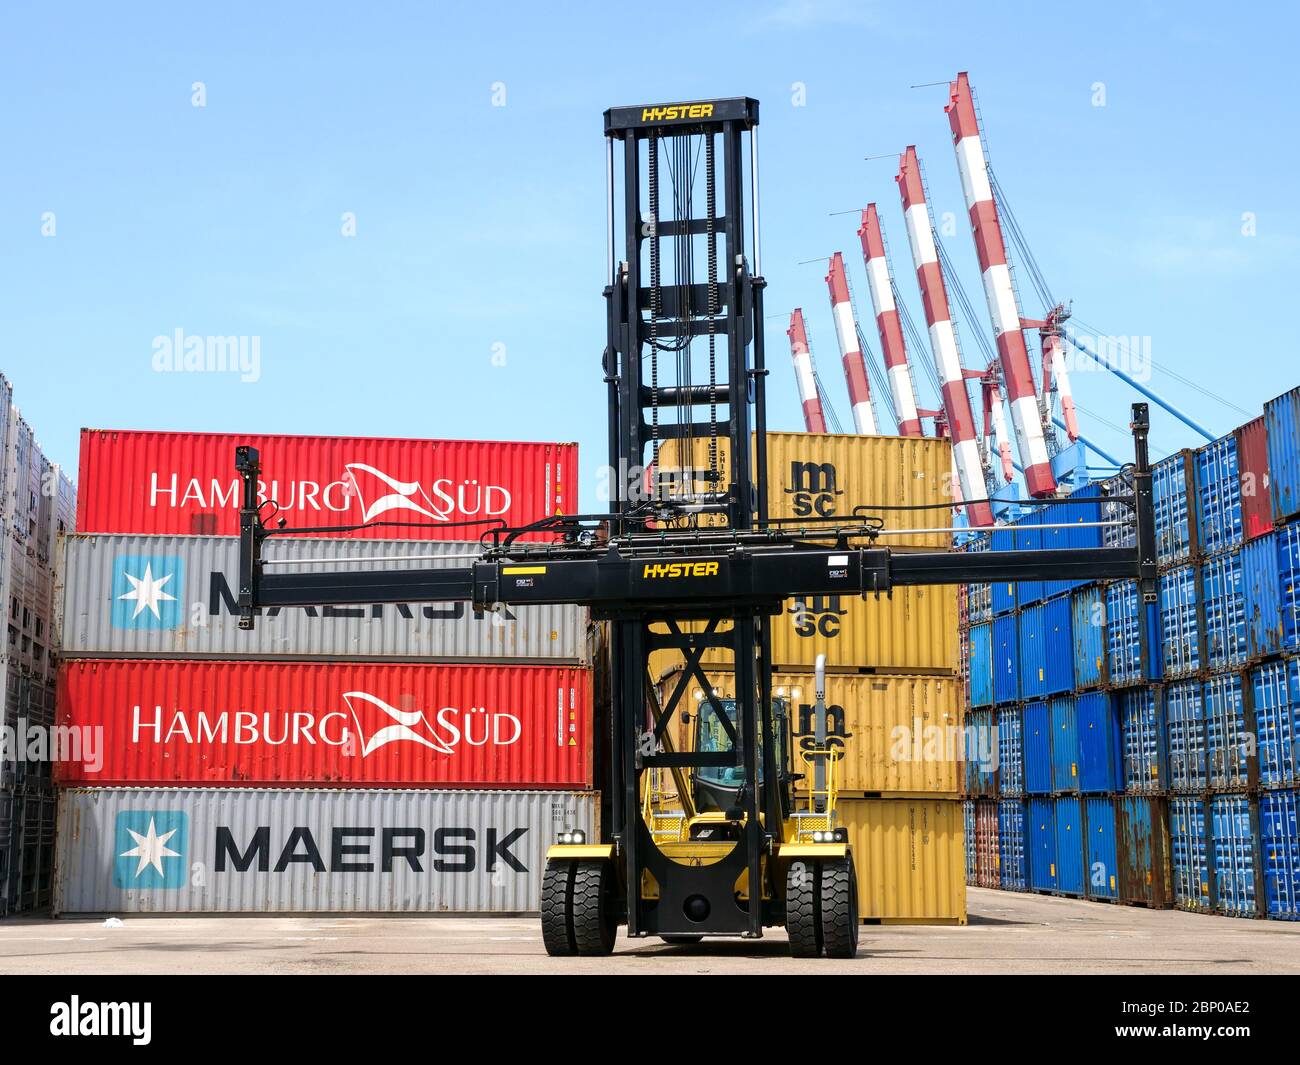 Hyster Container handler lifting a Shipping container in a local port. Stock Photo